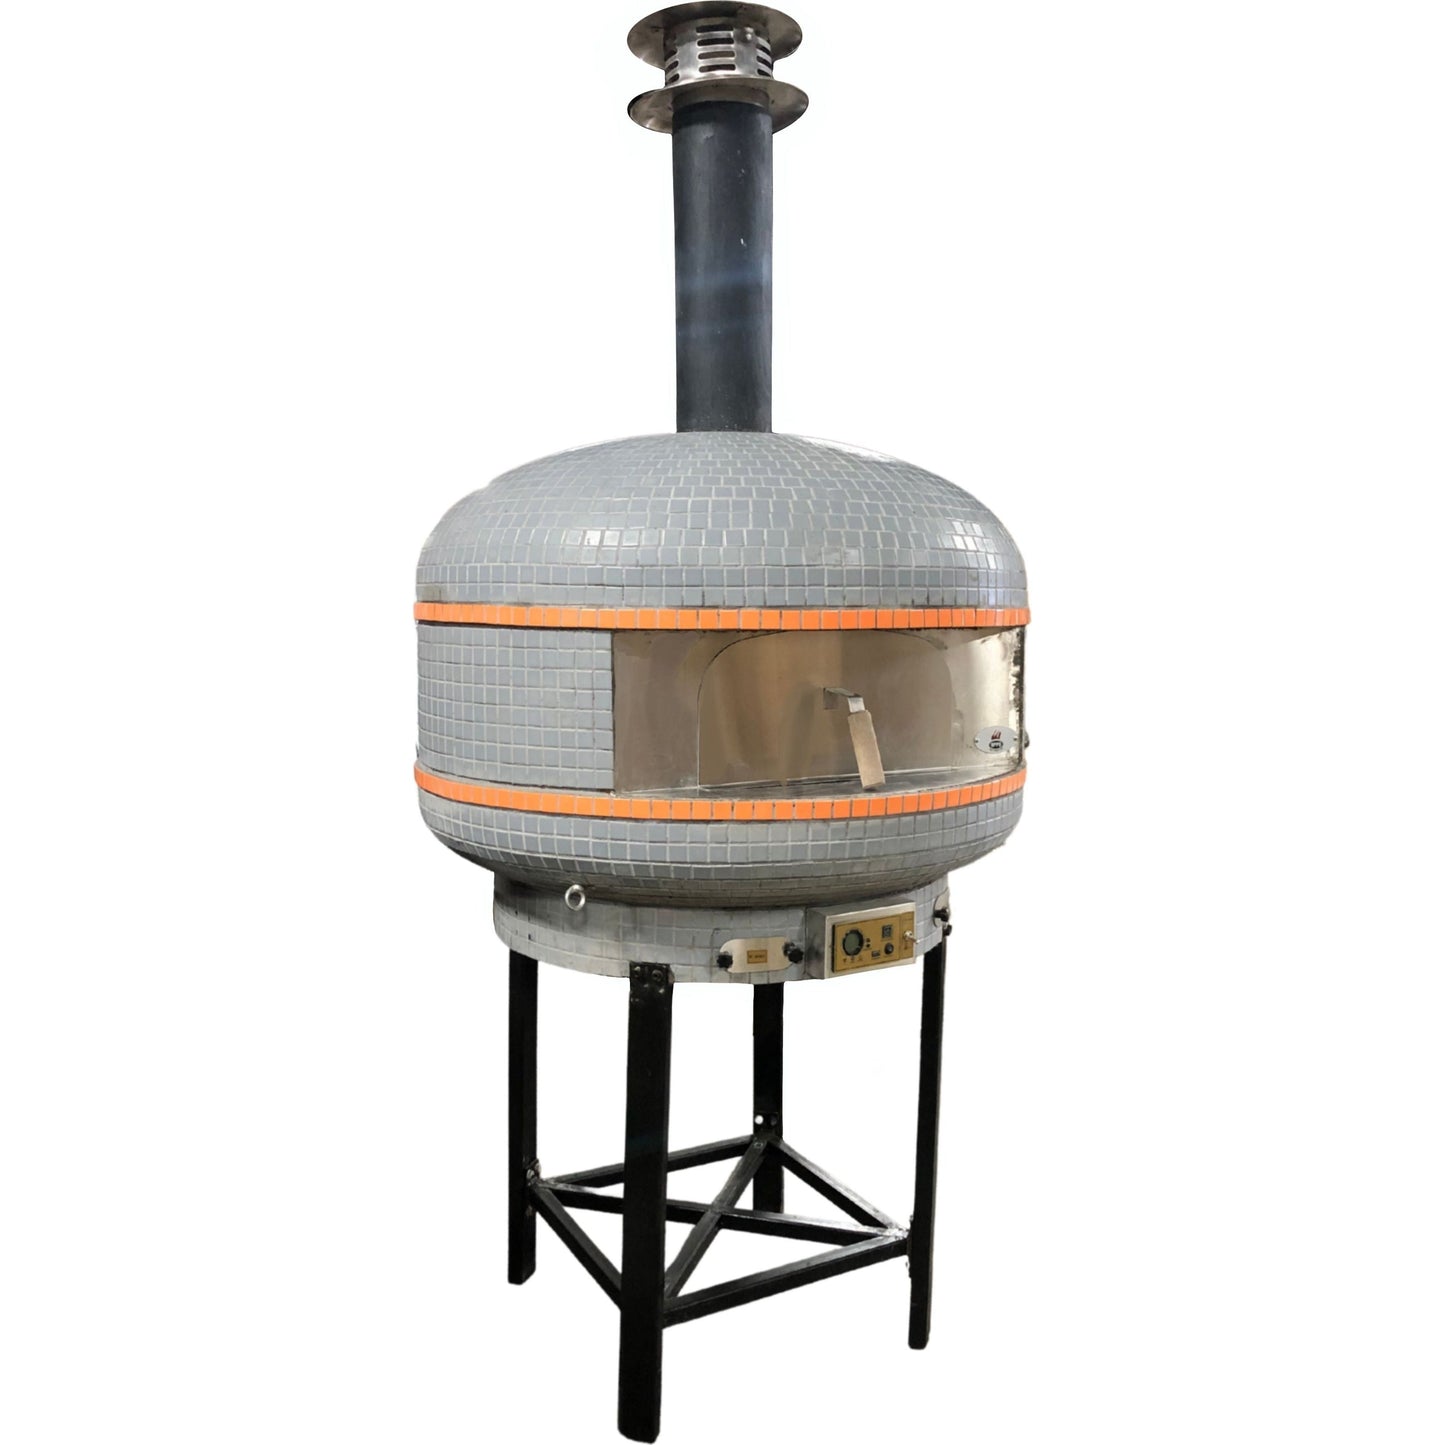 Pizza Makers & Ovens - WPPO Lava Series 48 In. Digital Controlled Wood Fired Pizza Oven (Grey/Orange Tile) With Convection Fan - WKPM-D1200